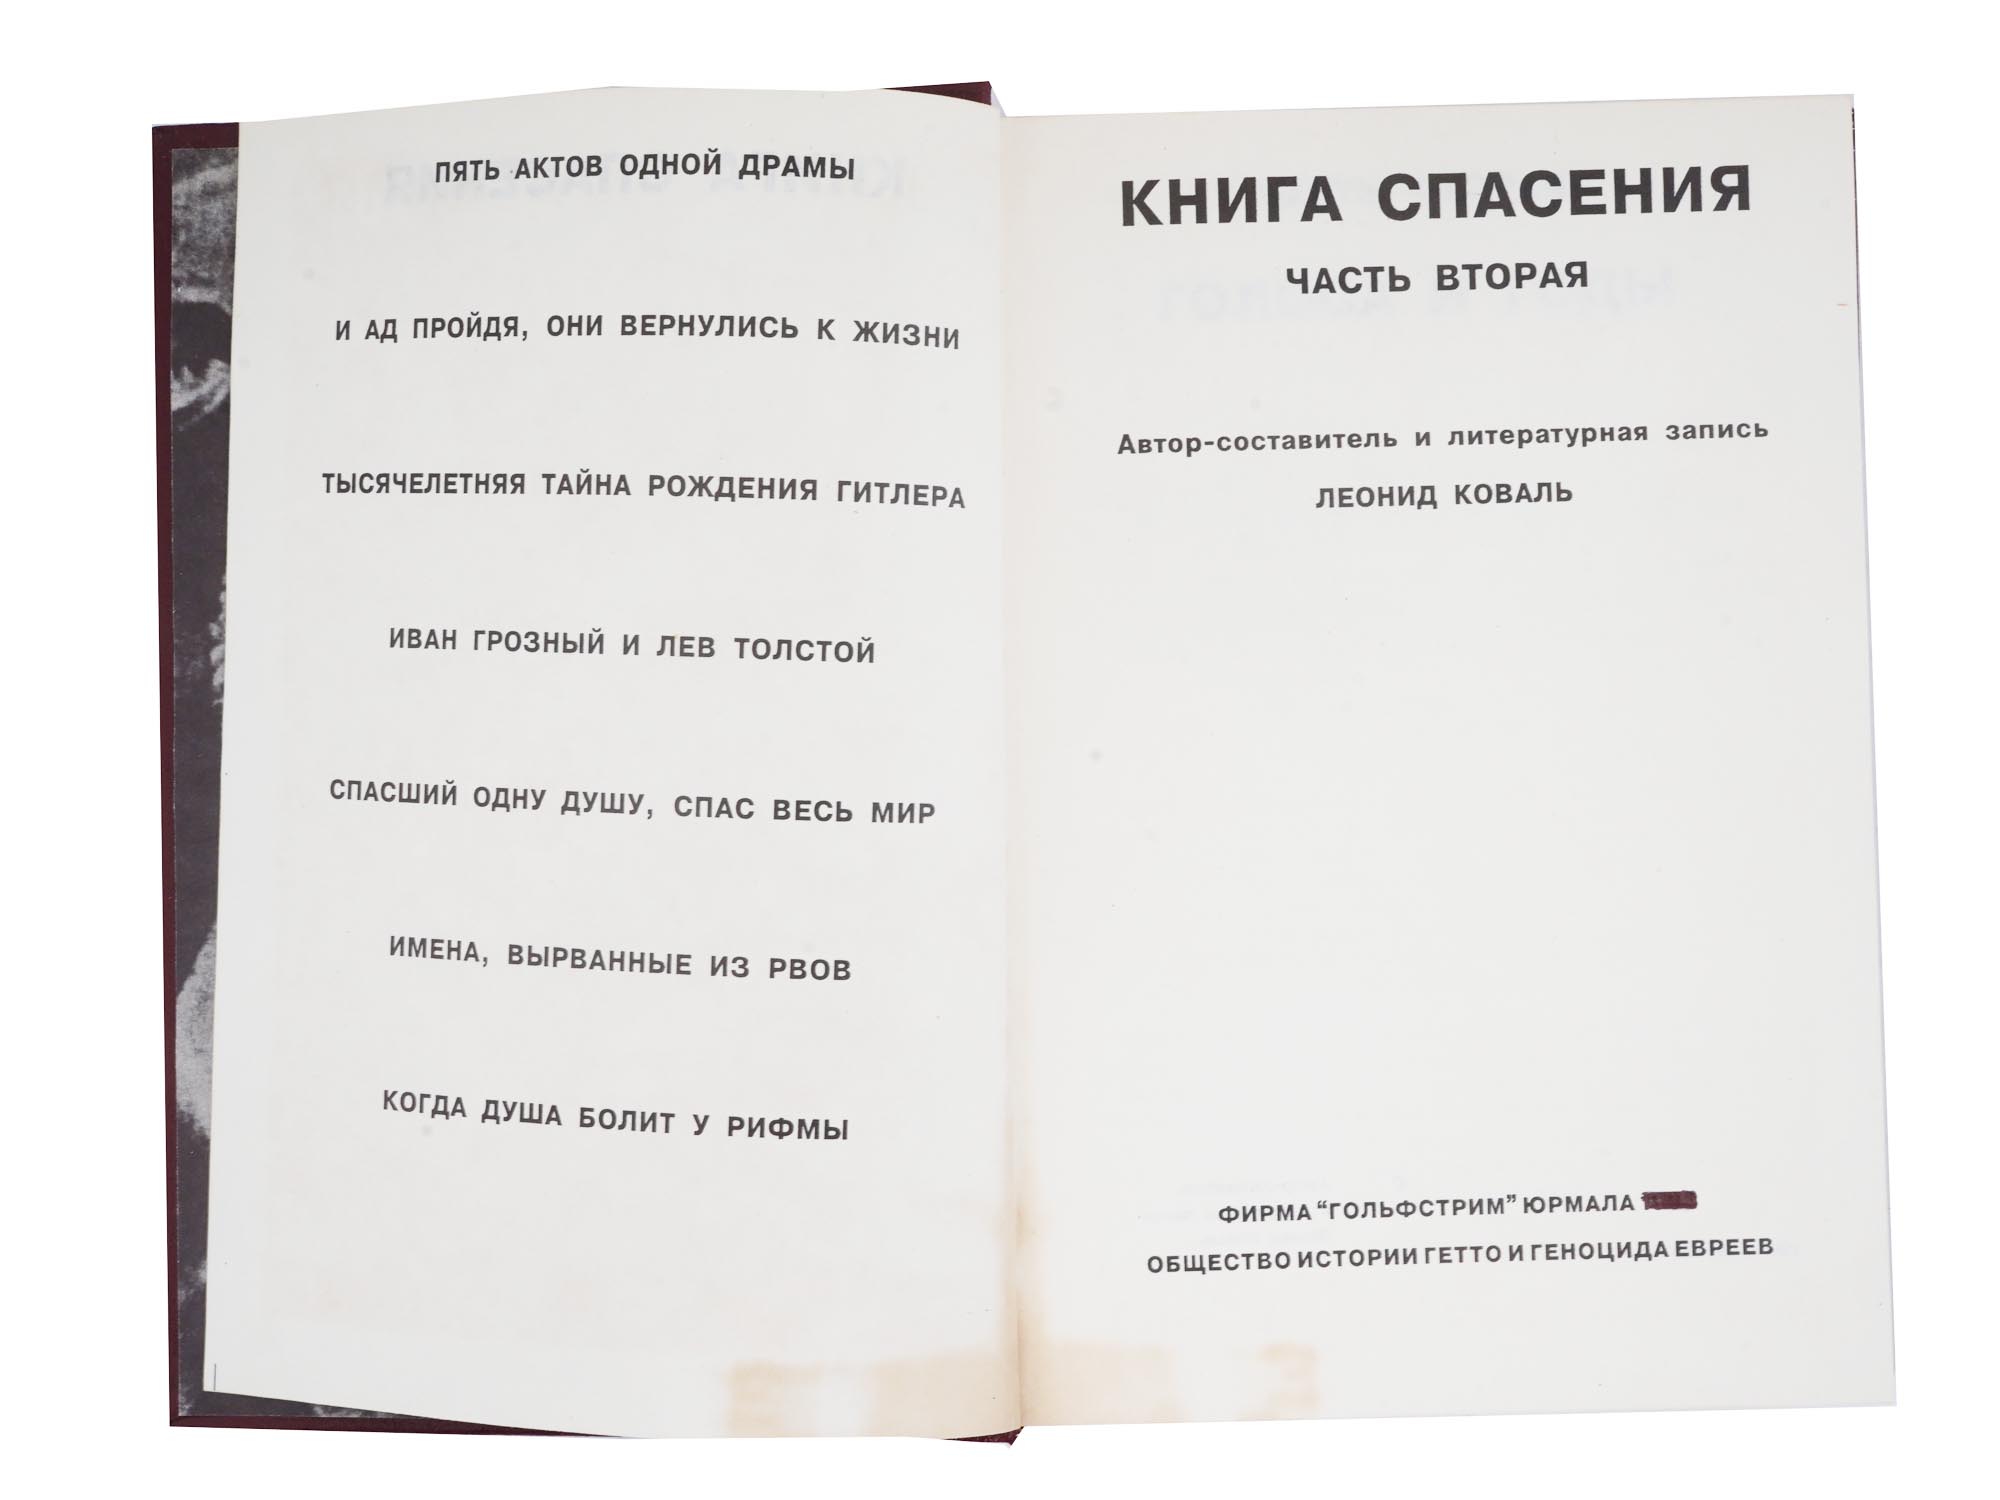 RUSSIAN BOOK OF SALVATION IN THREE PARTS BY LEONID KOVAL PIC-4